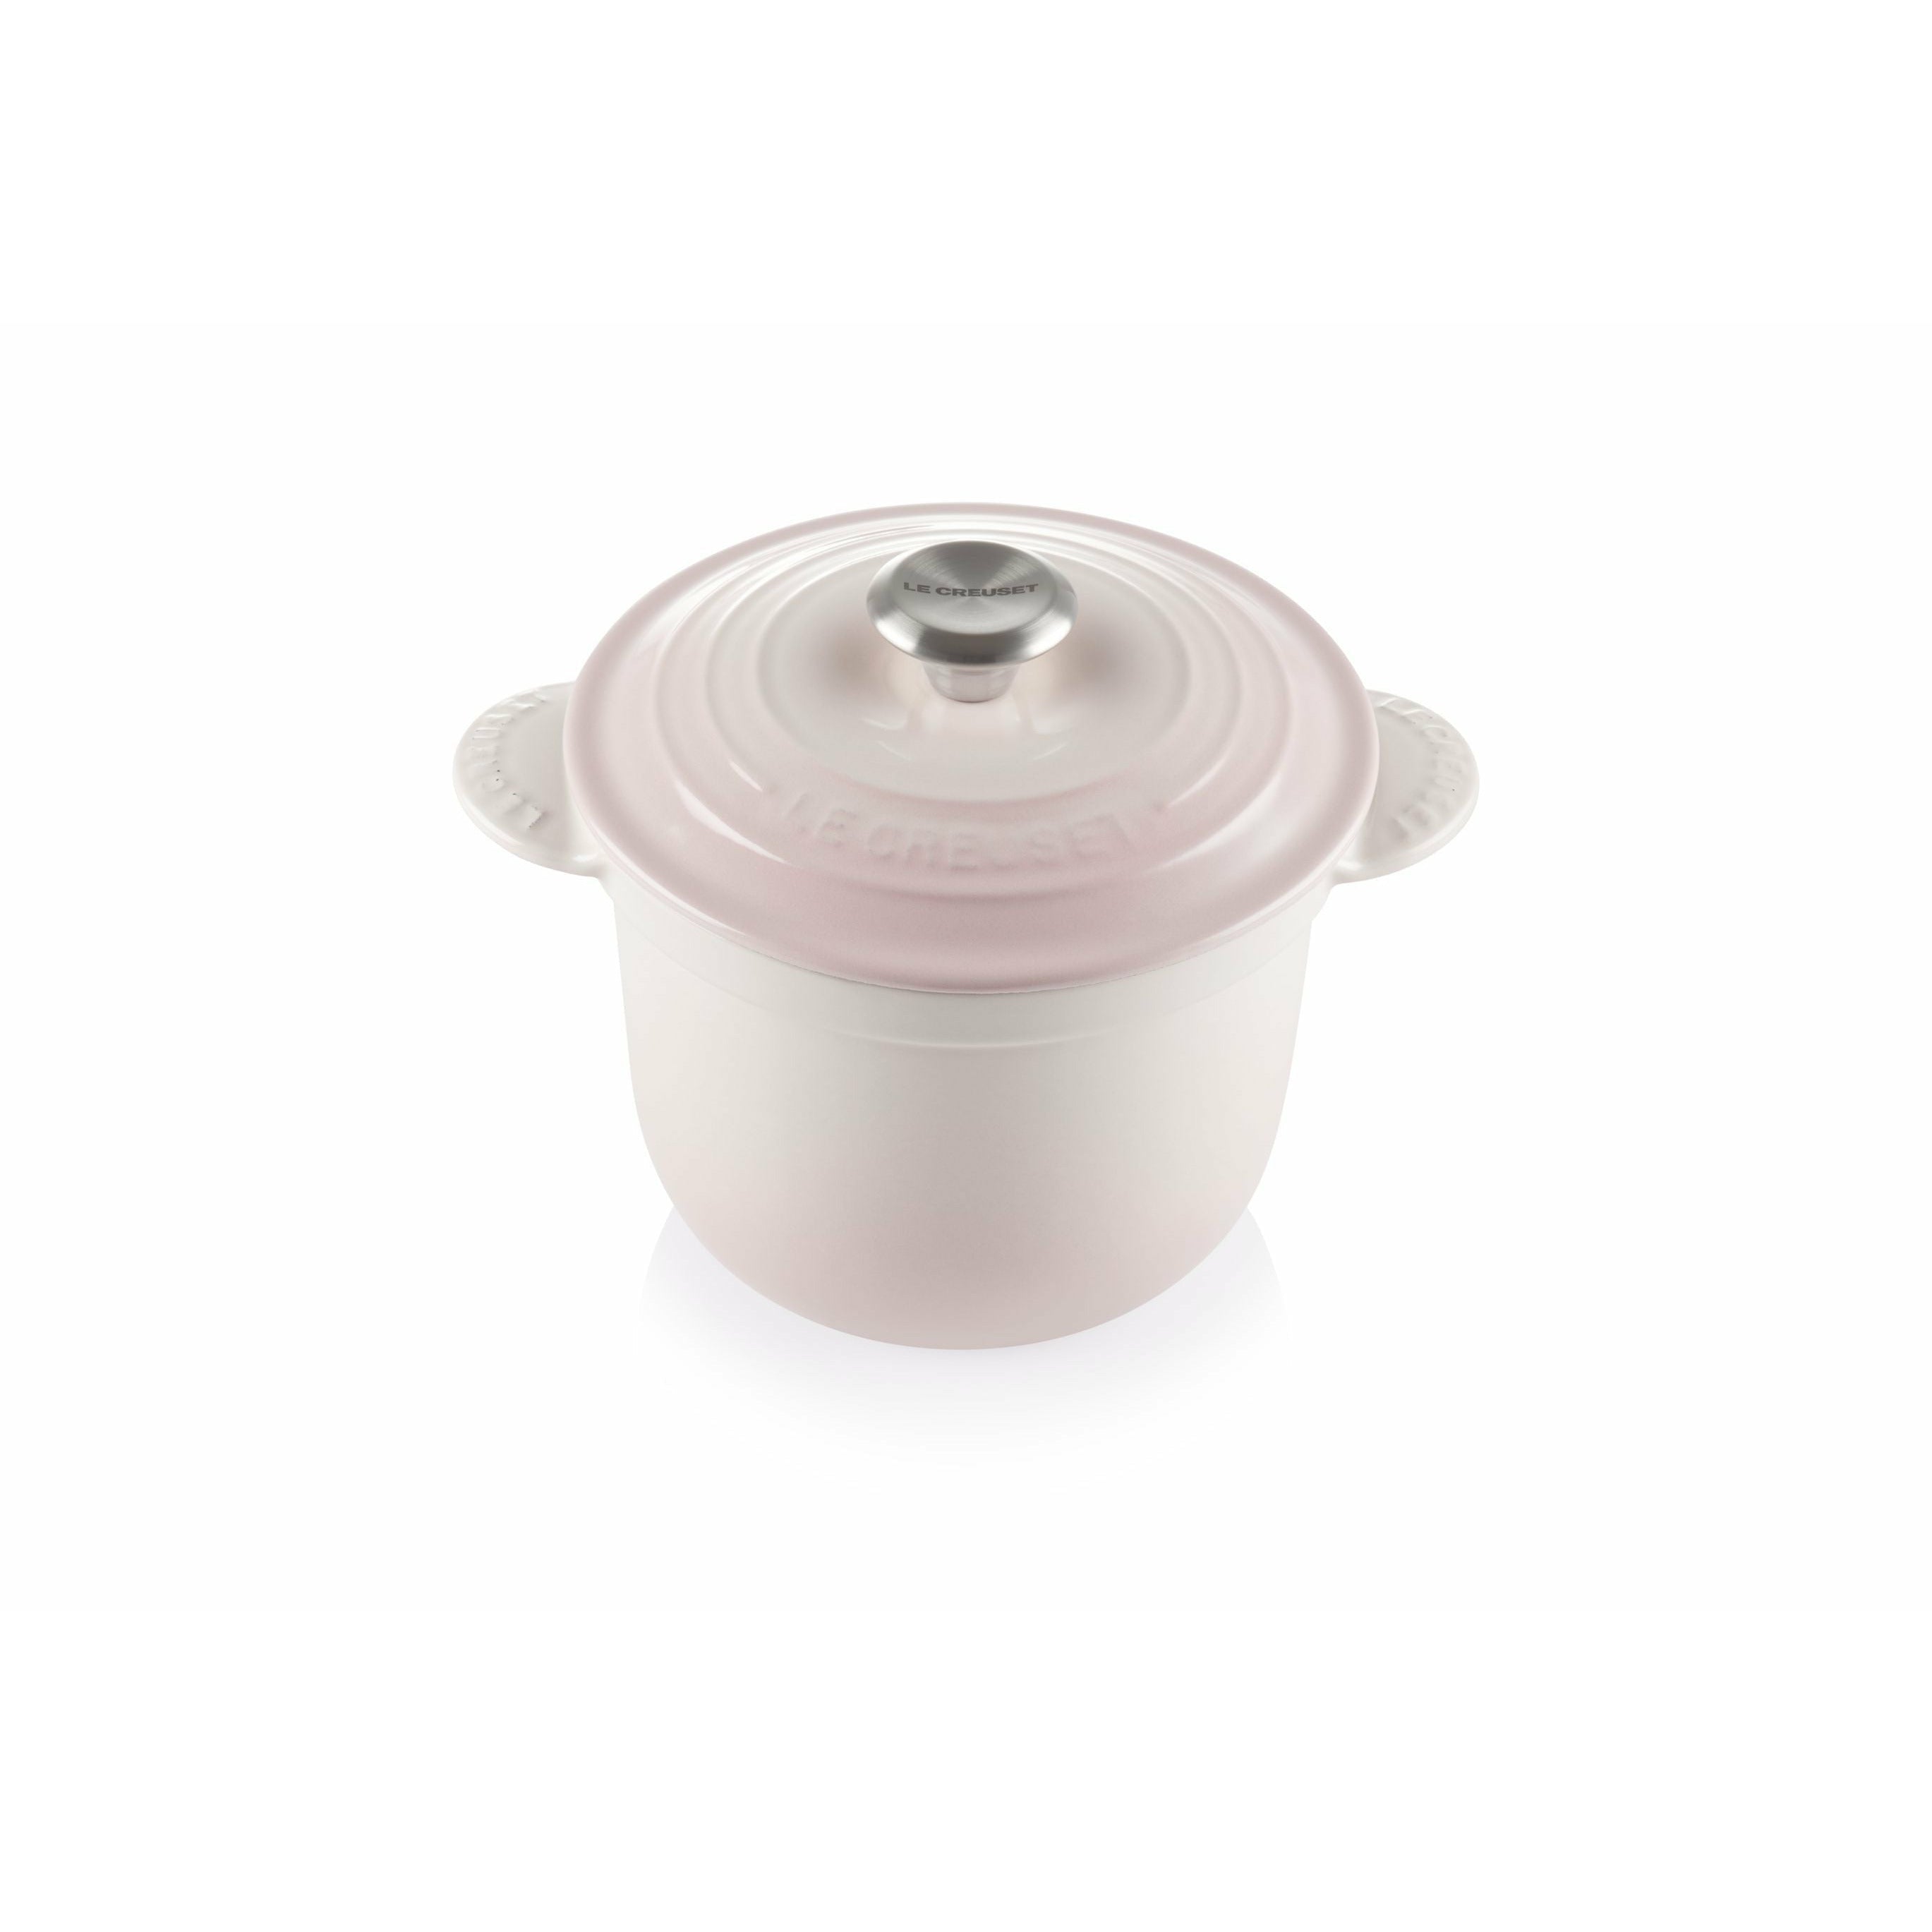 Le Creuset Cocotte Every With Poteriedeckel 18 Cm, Shell Pink